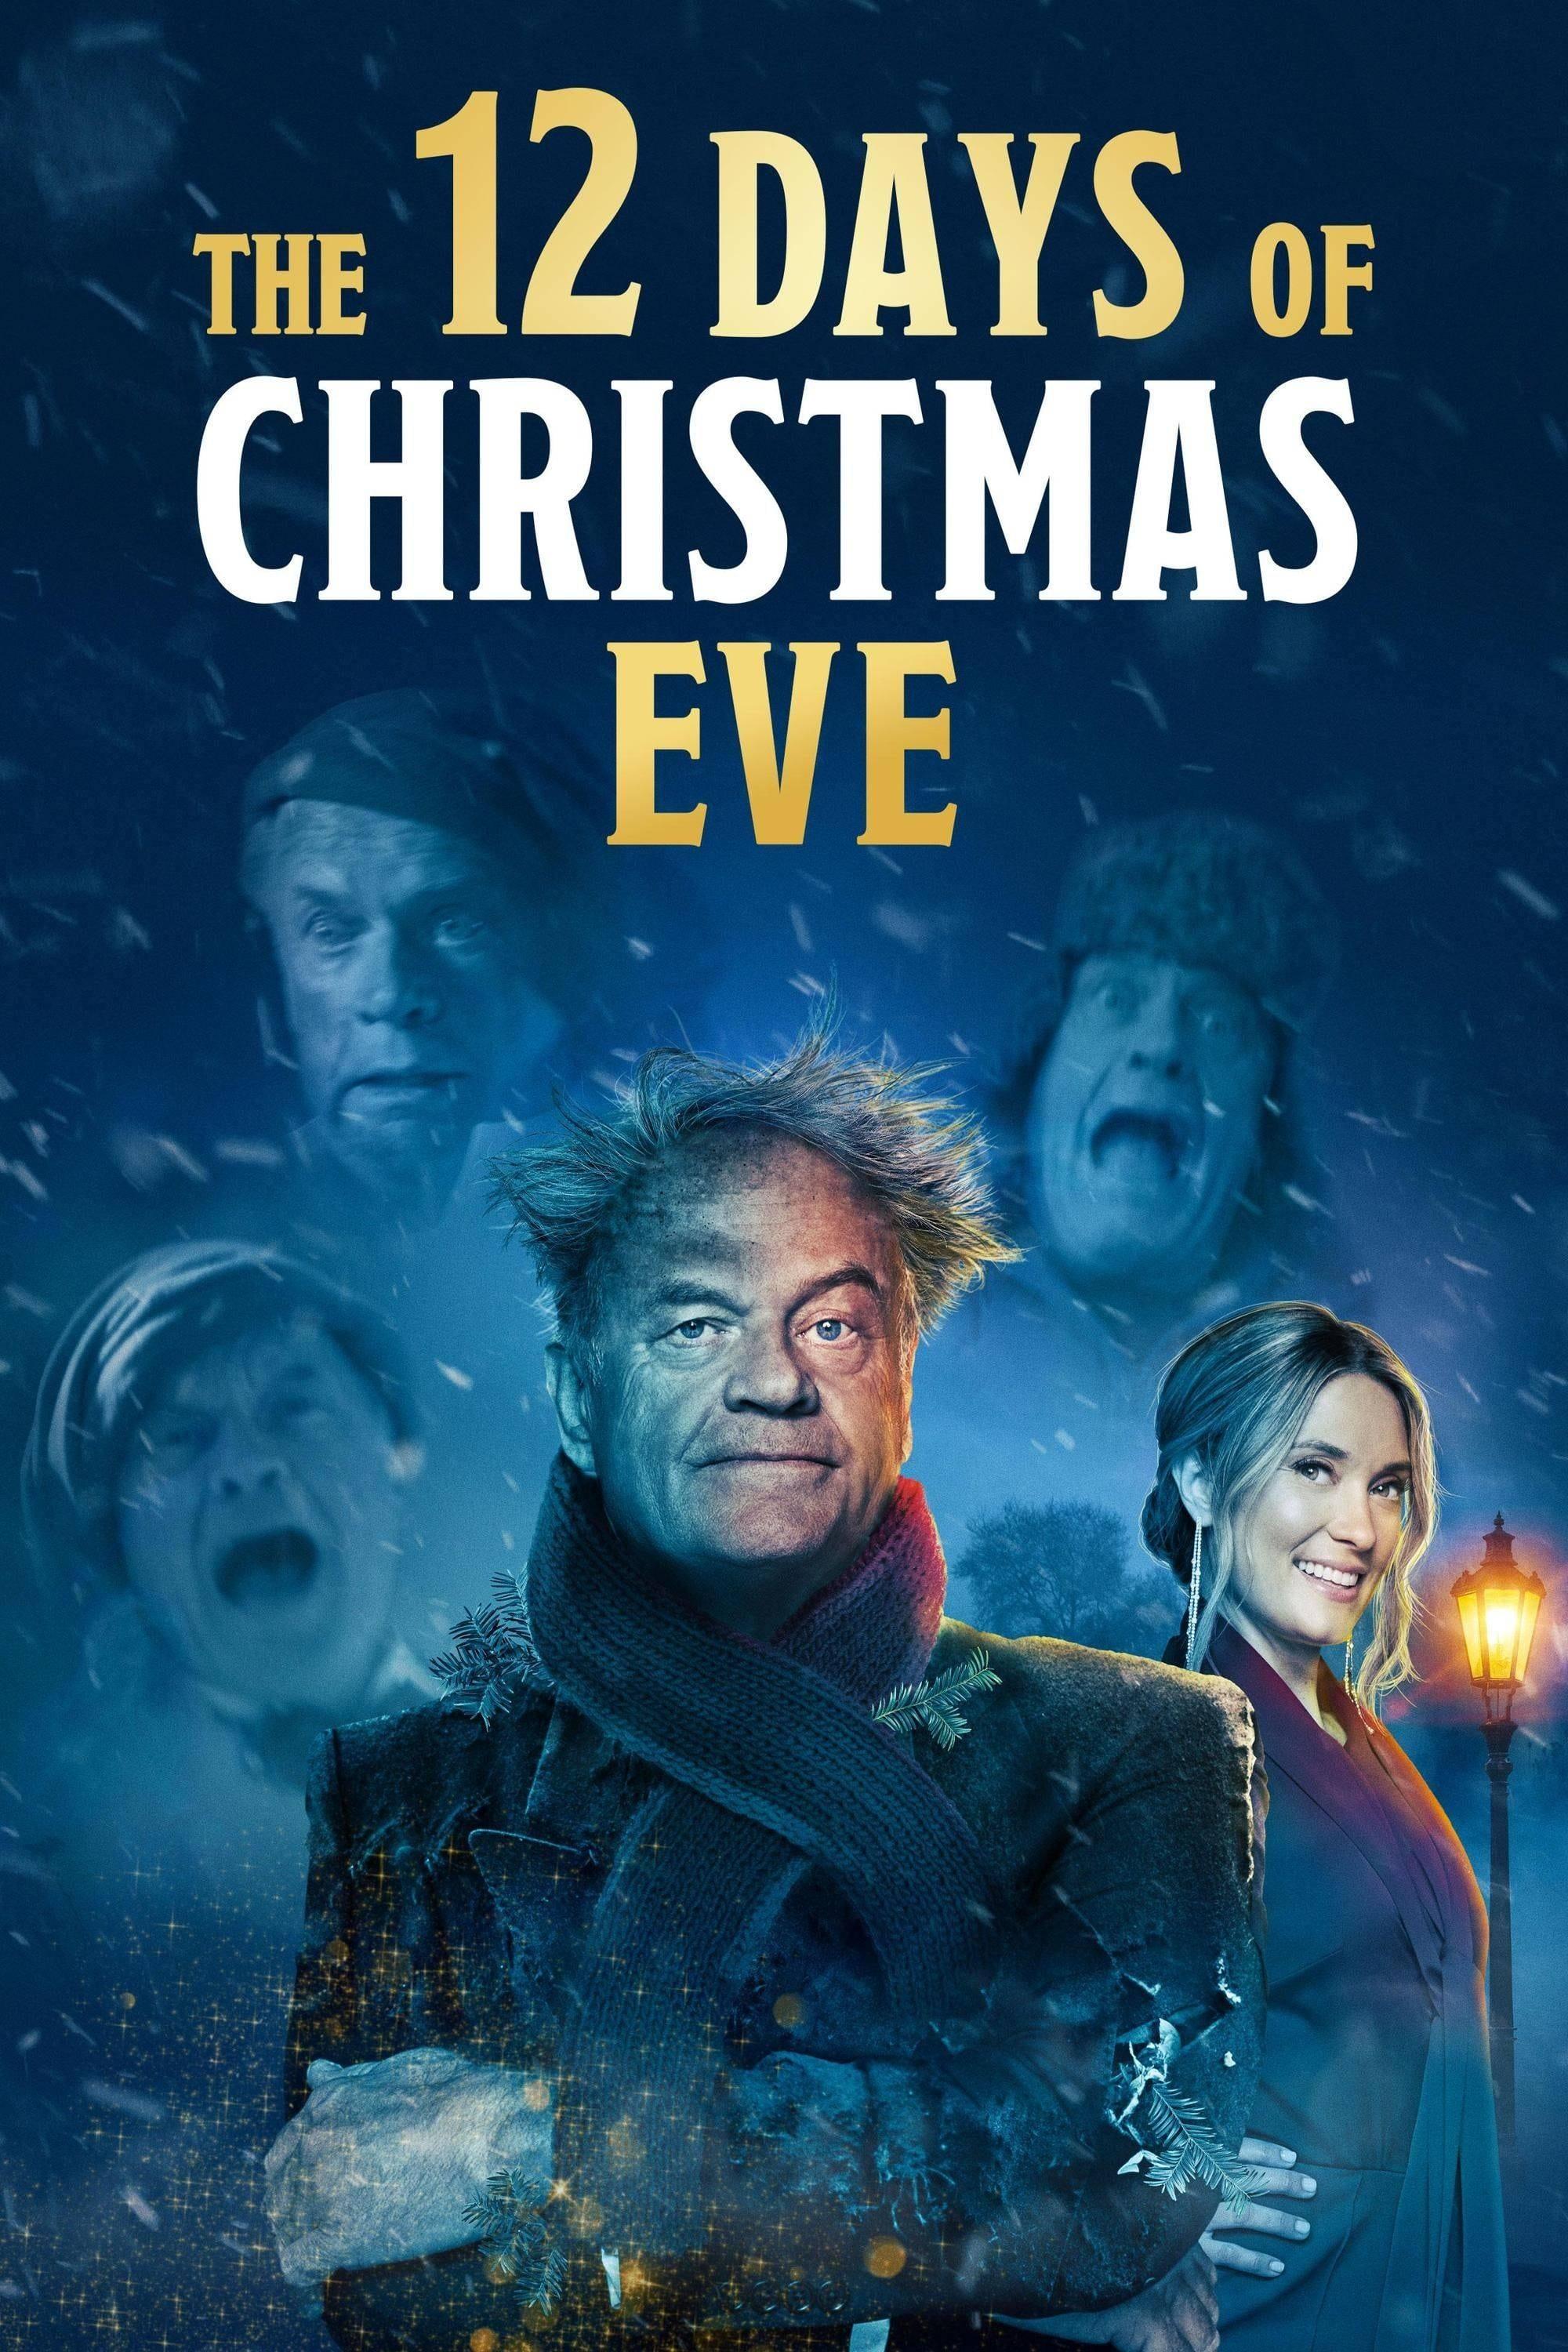 The 12 Days of Christmas Eve poster